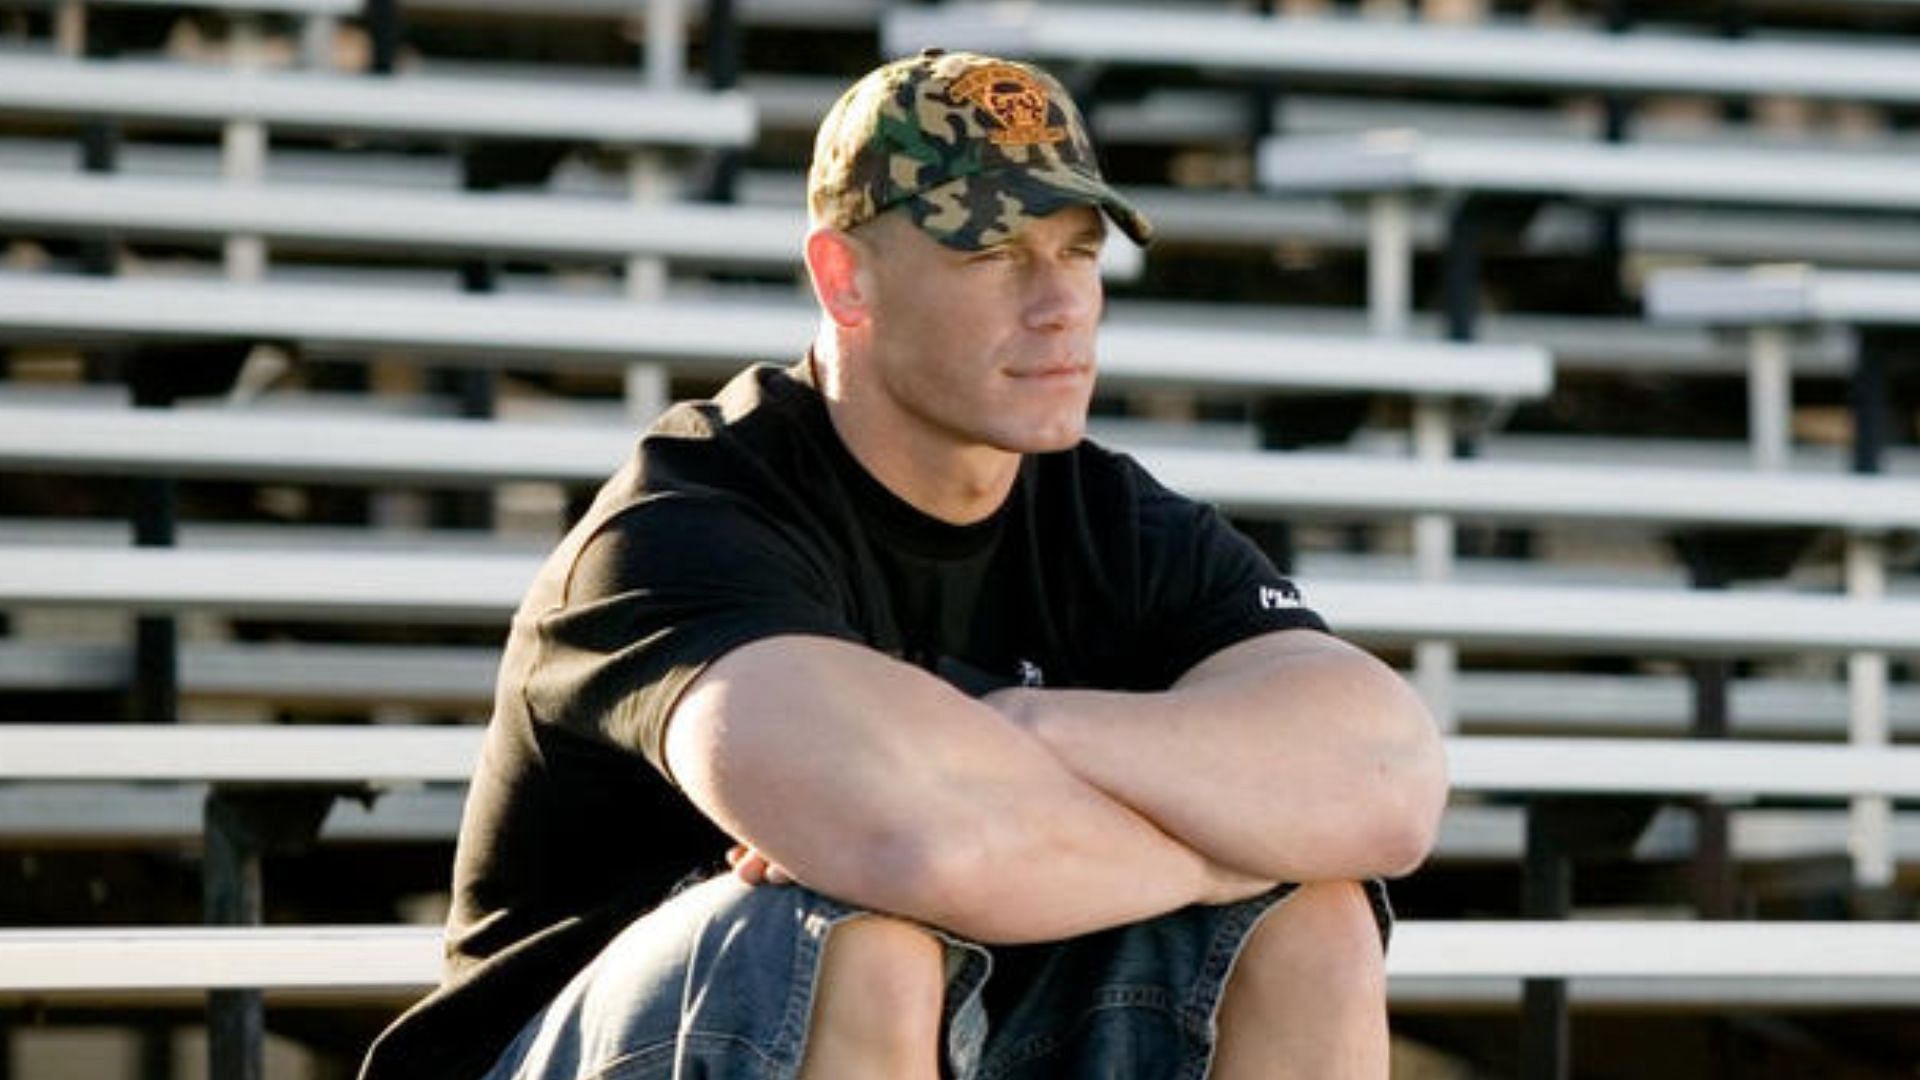 John Cena came from humble beginnings in WWE